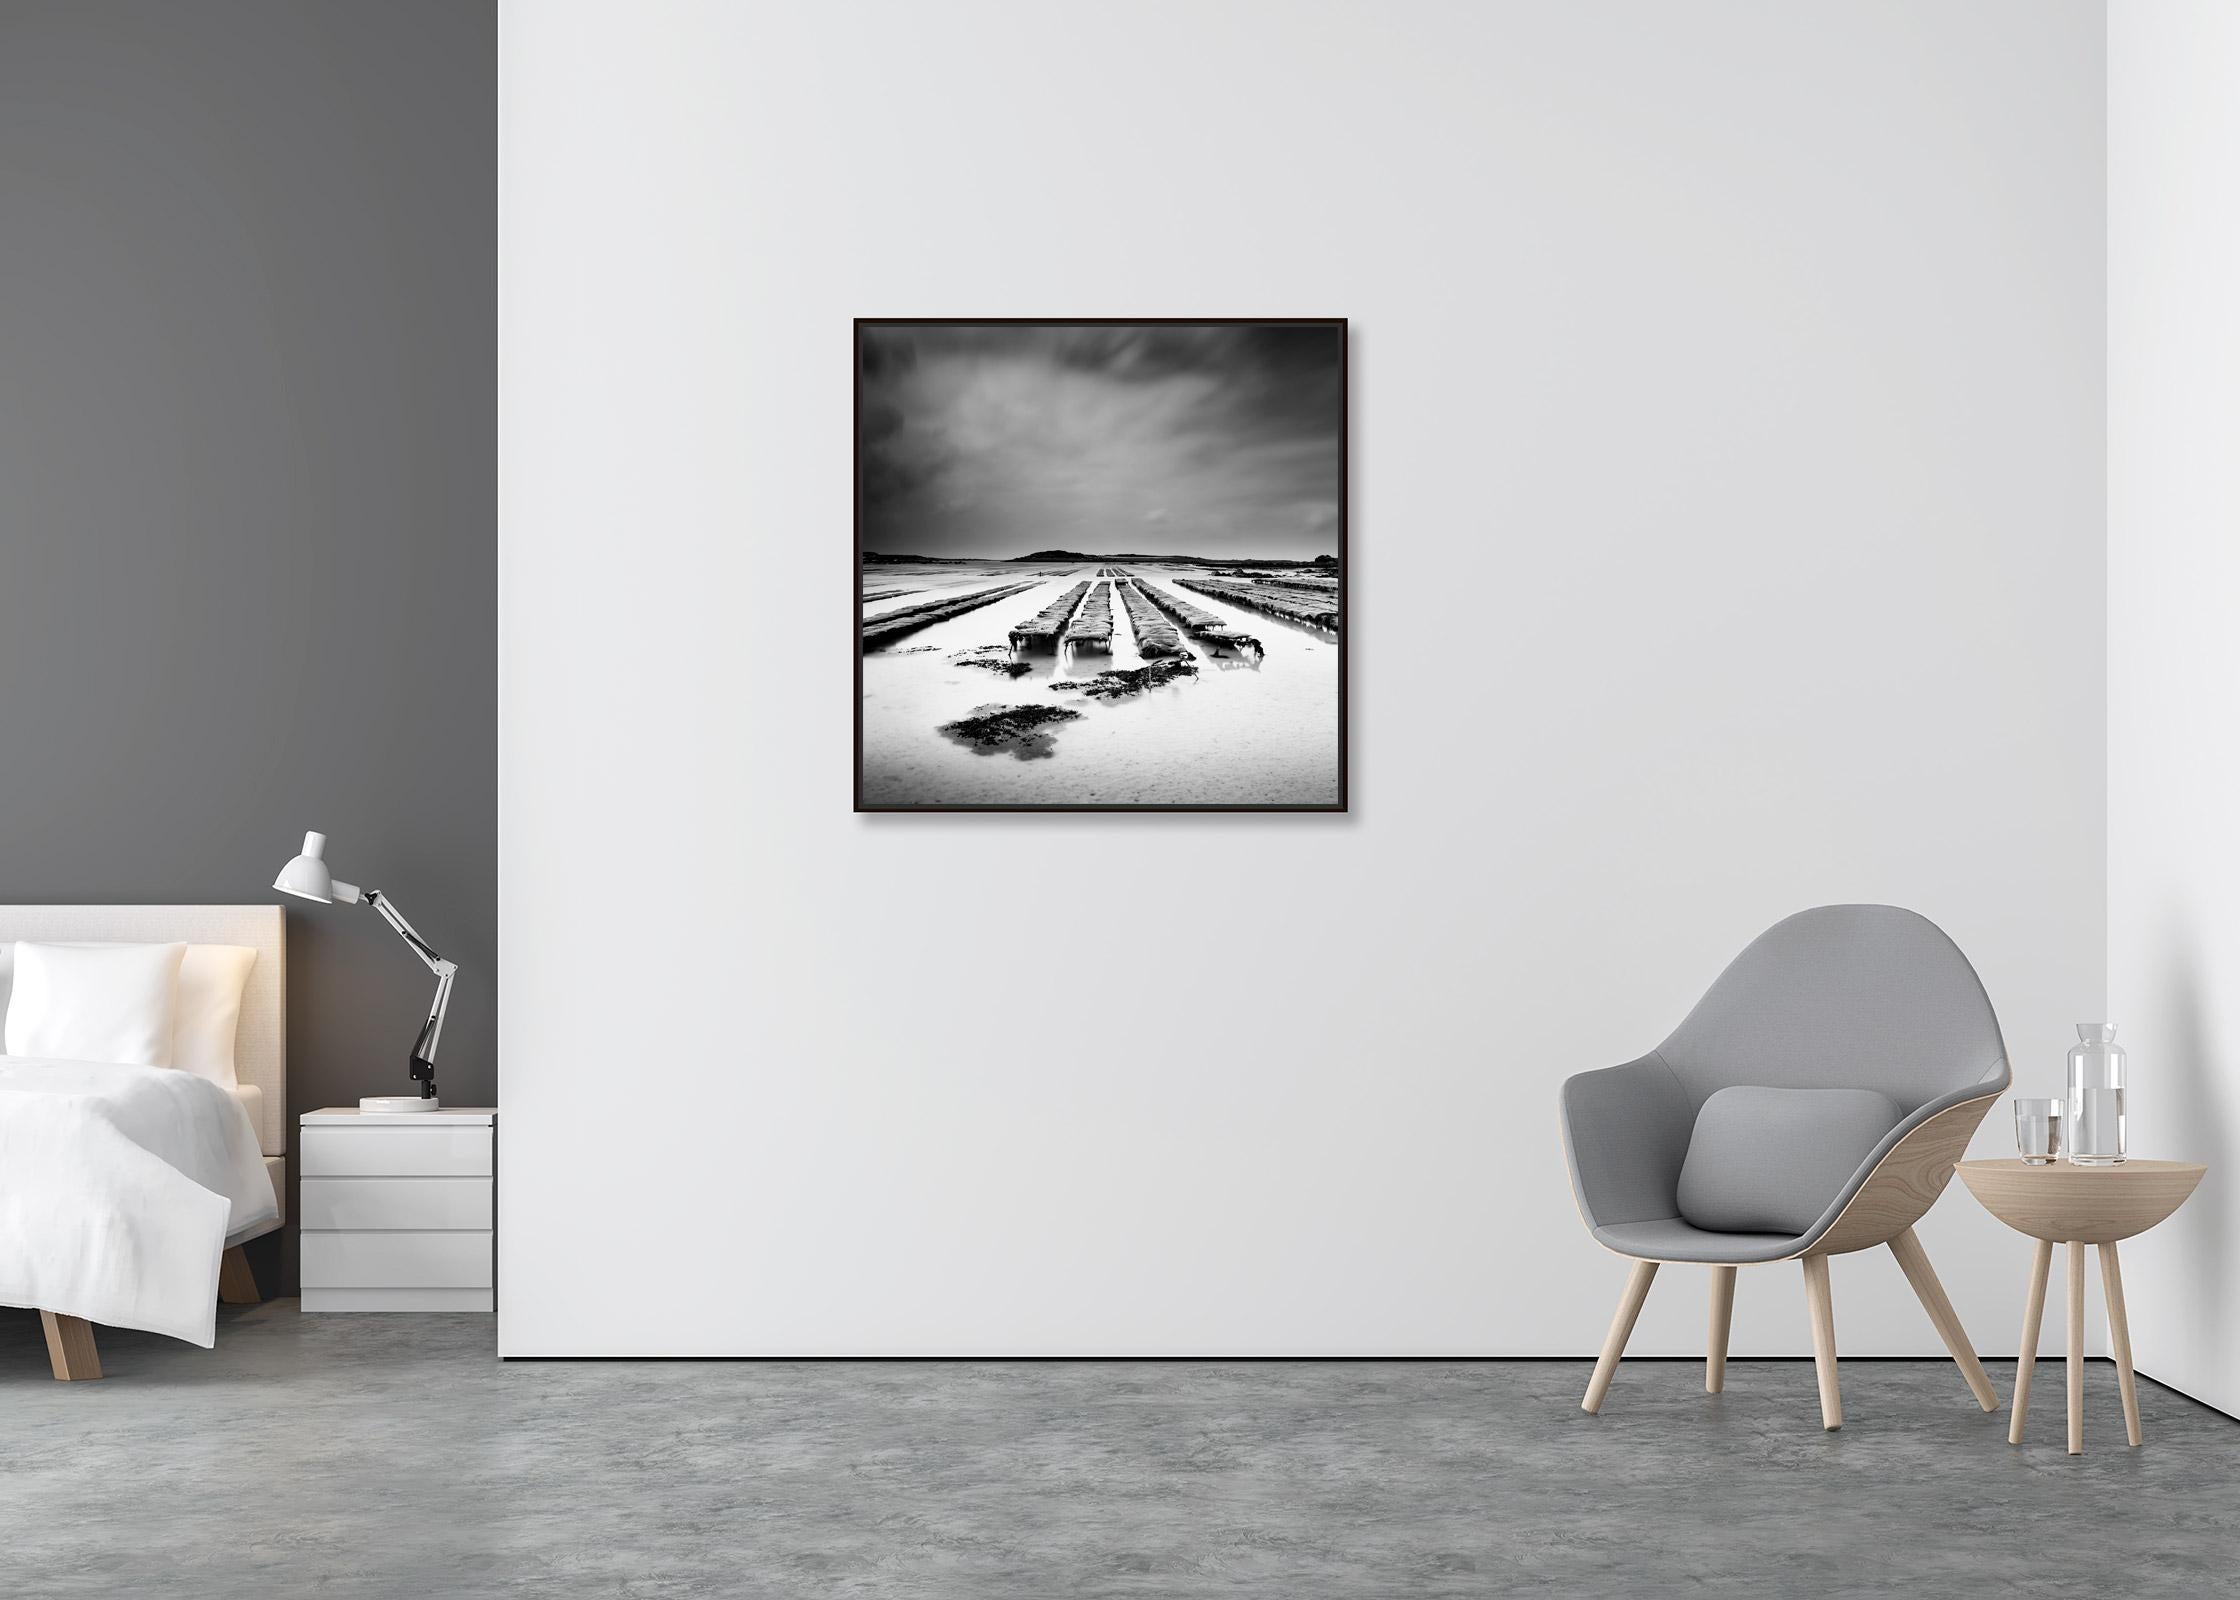 Oyster Farm, Atlantic Coast, France, black and white photography, art seascape - Contemporary Photograph by Gerald Berghammer